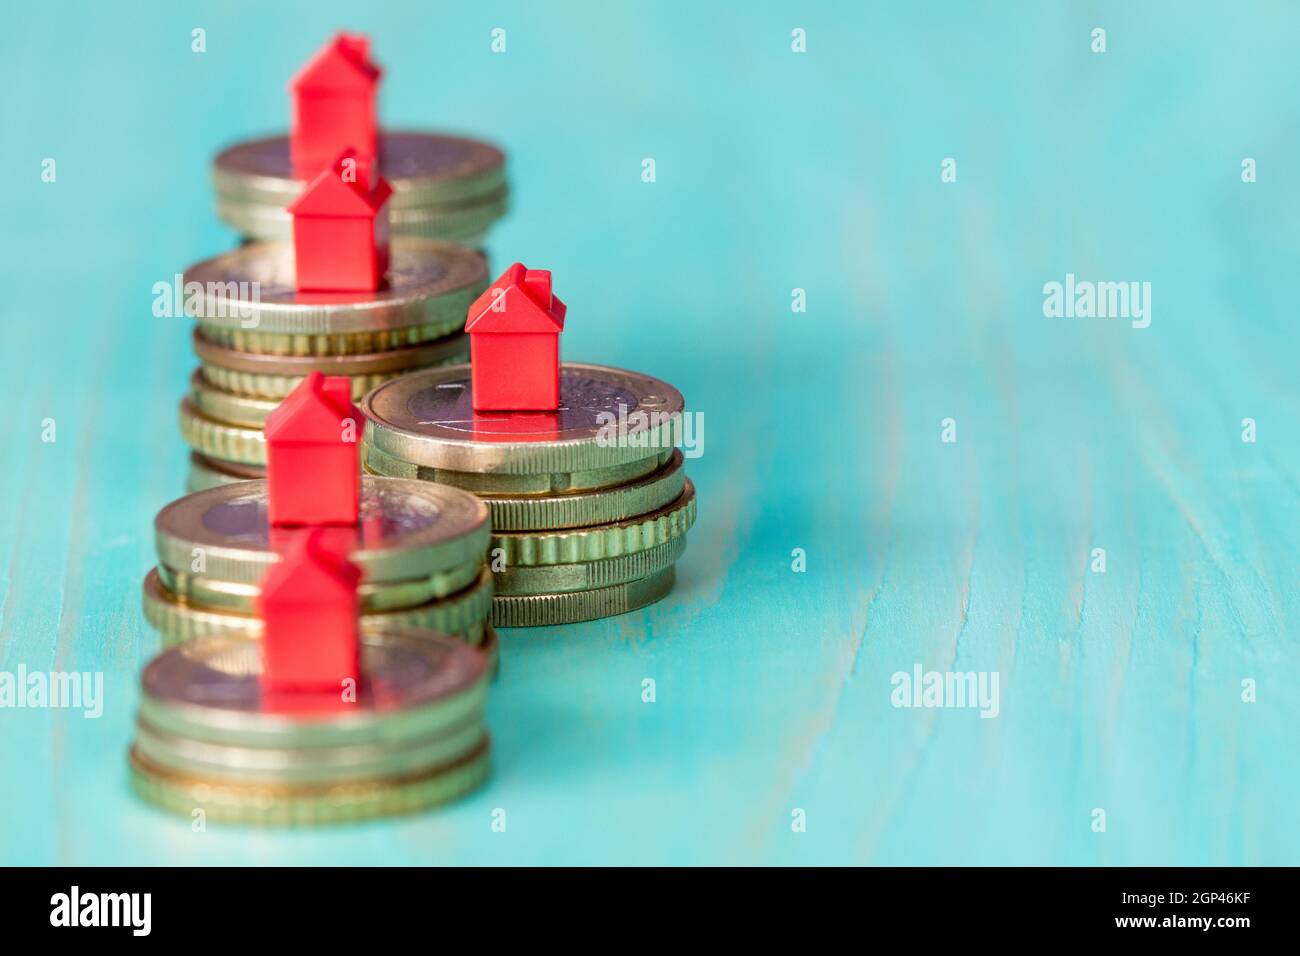 Real estate mortgage concept with small house models on coins row Stock Photo